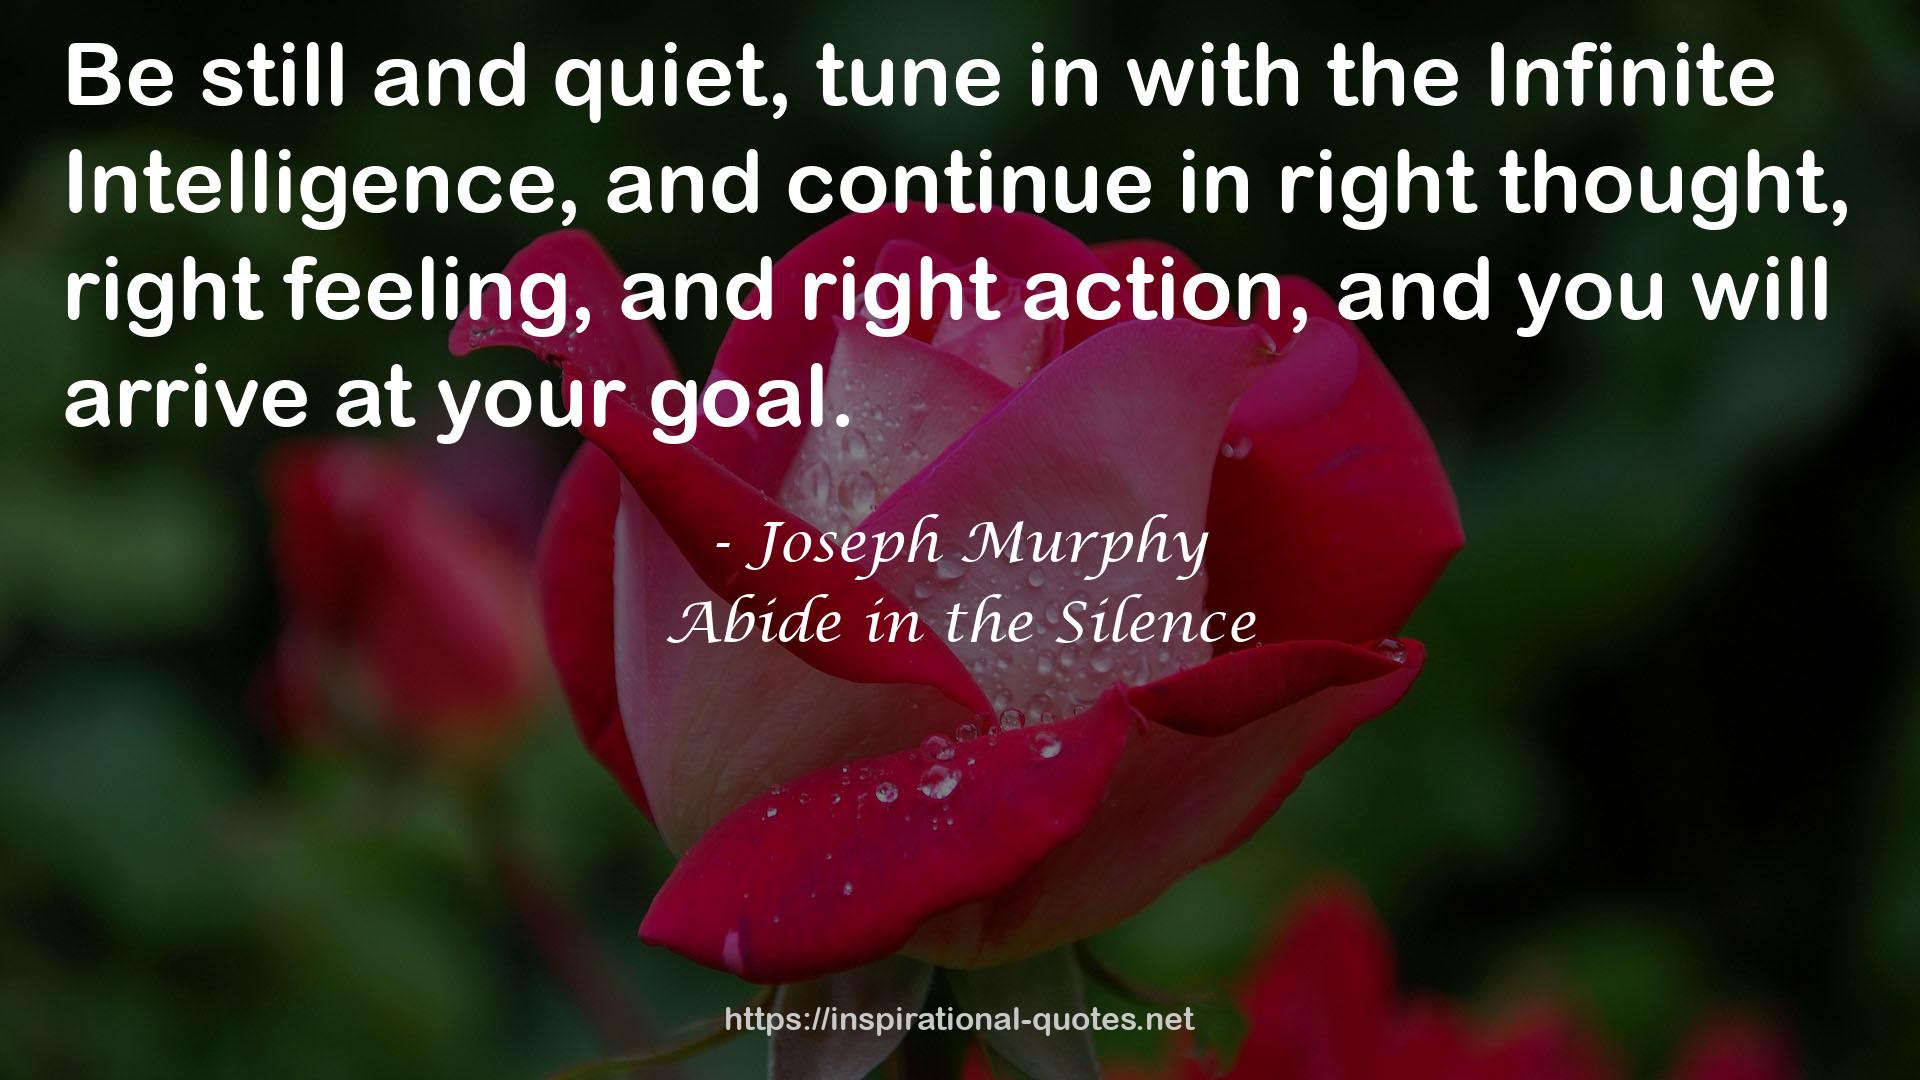 Abide in the Silence QUOTES